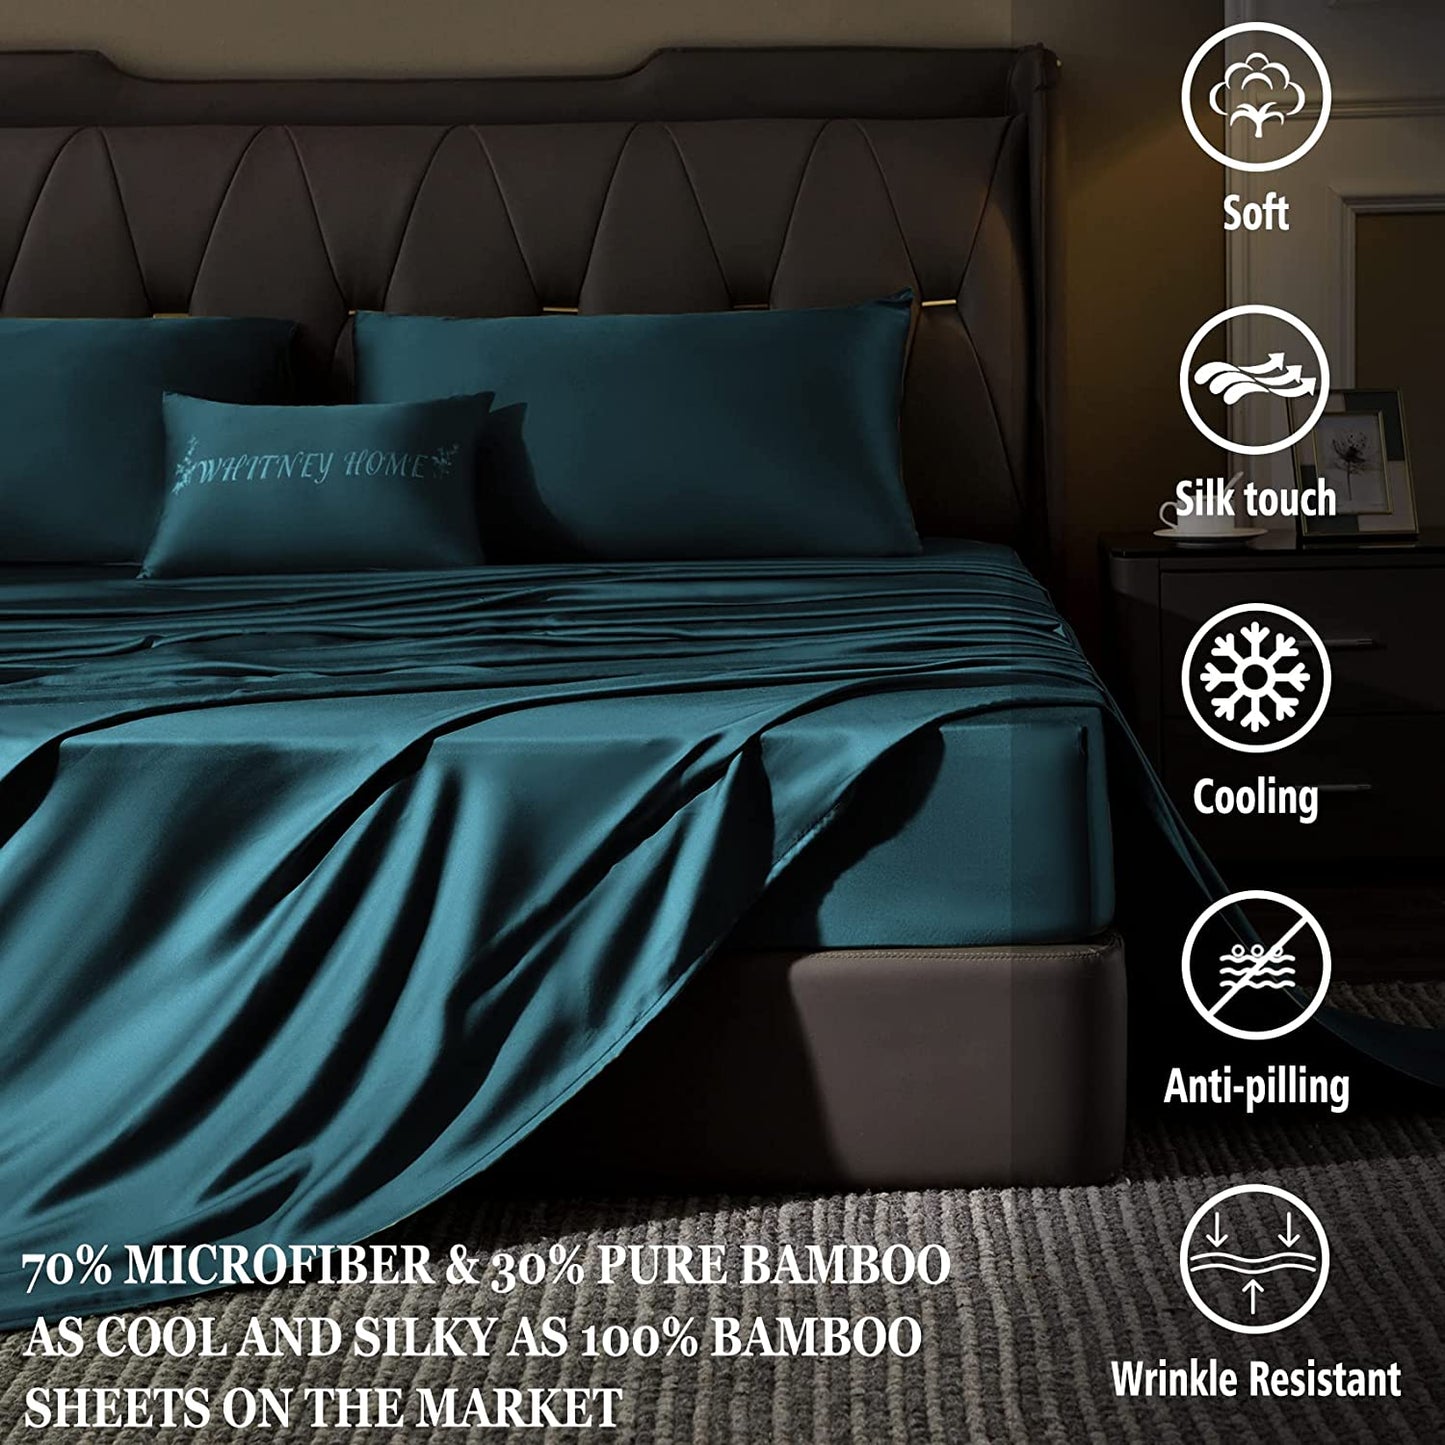 Bamboo Sheet Set Soft Silky Cooling Bed Sheet Set 4 Piece Lightweight Anti-Pilling Cool Wrinkle Free with 16" Extra Deep Pocket